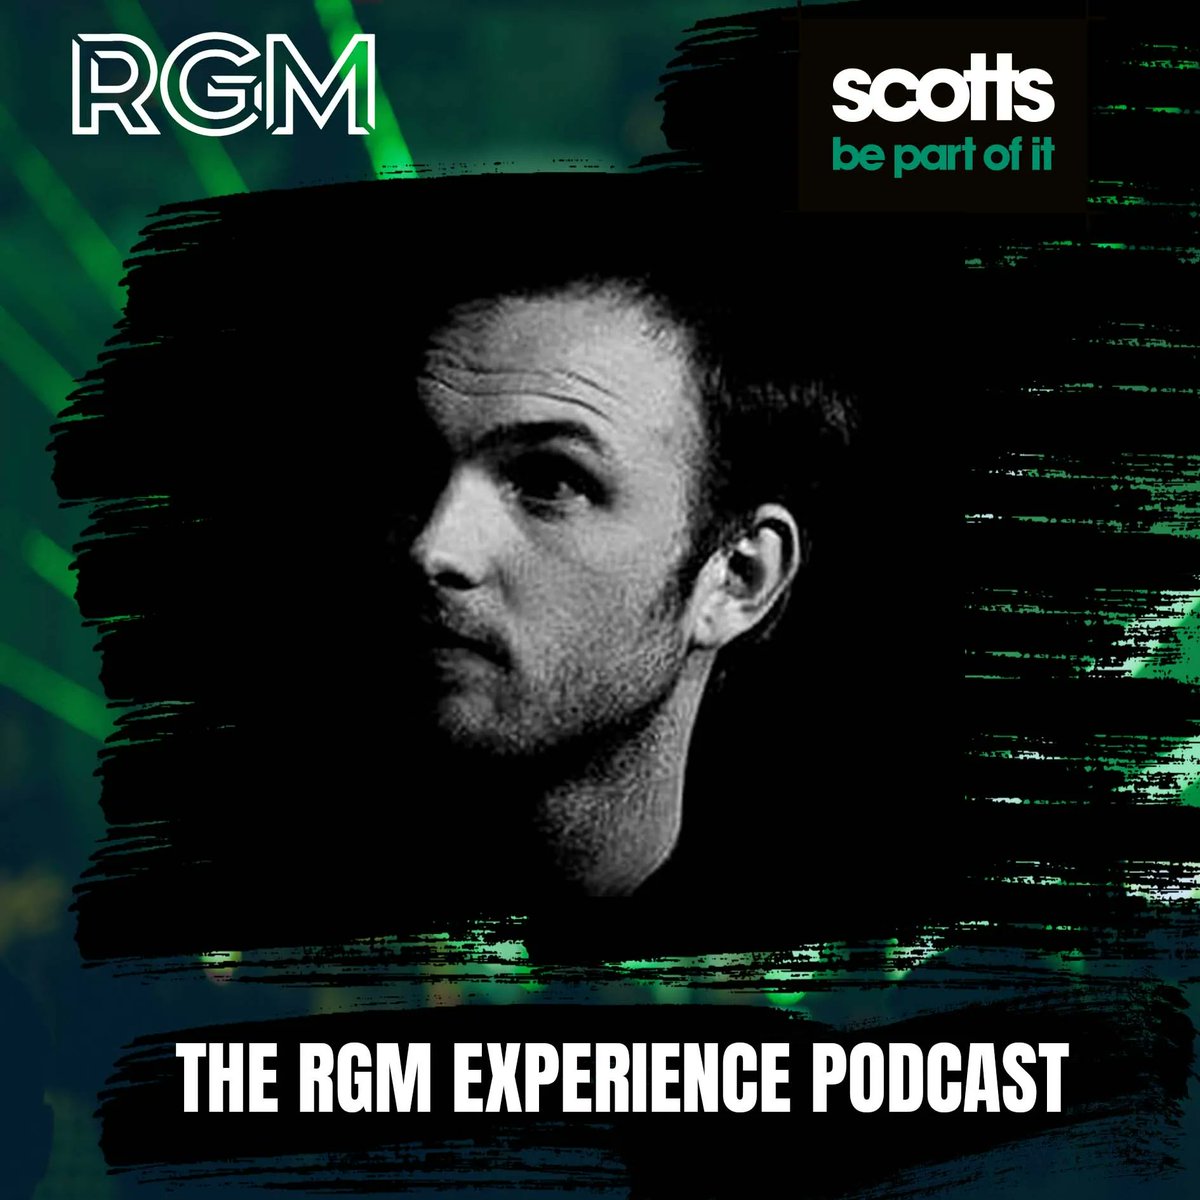 💚OUT NOW💚 We are joined by @billybibs20 from @HAiGband Great tales behind the scenes of the music industry! Listen for free - linktr.ee/rgmpodcast Sponsored by - @scottsmenswear #RGM #podcast